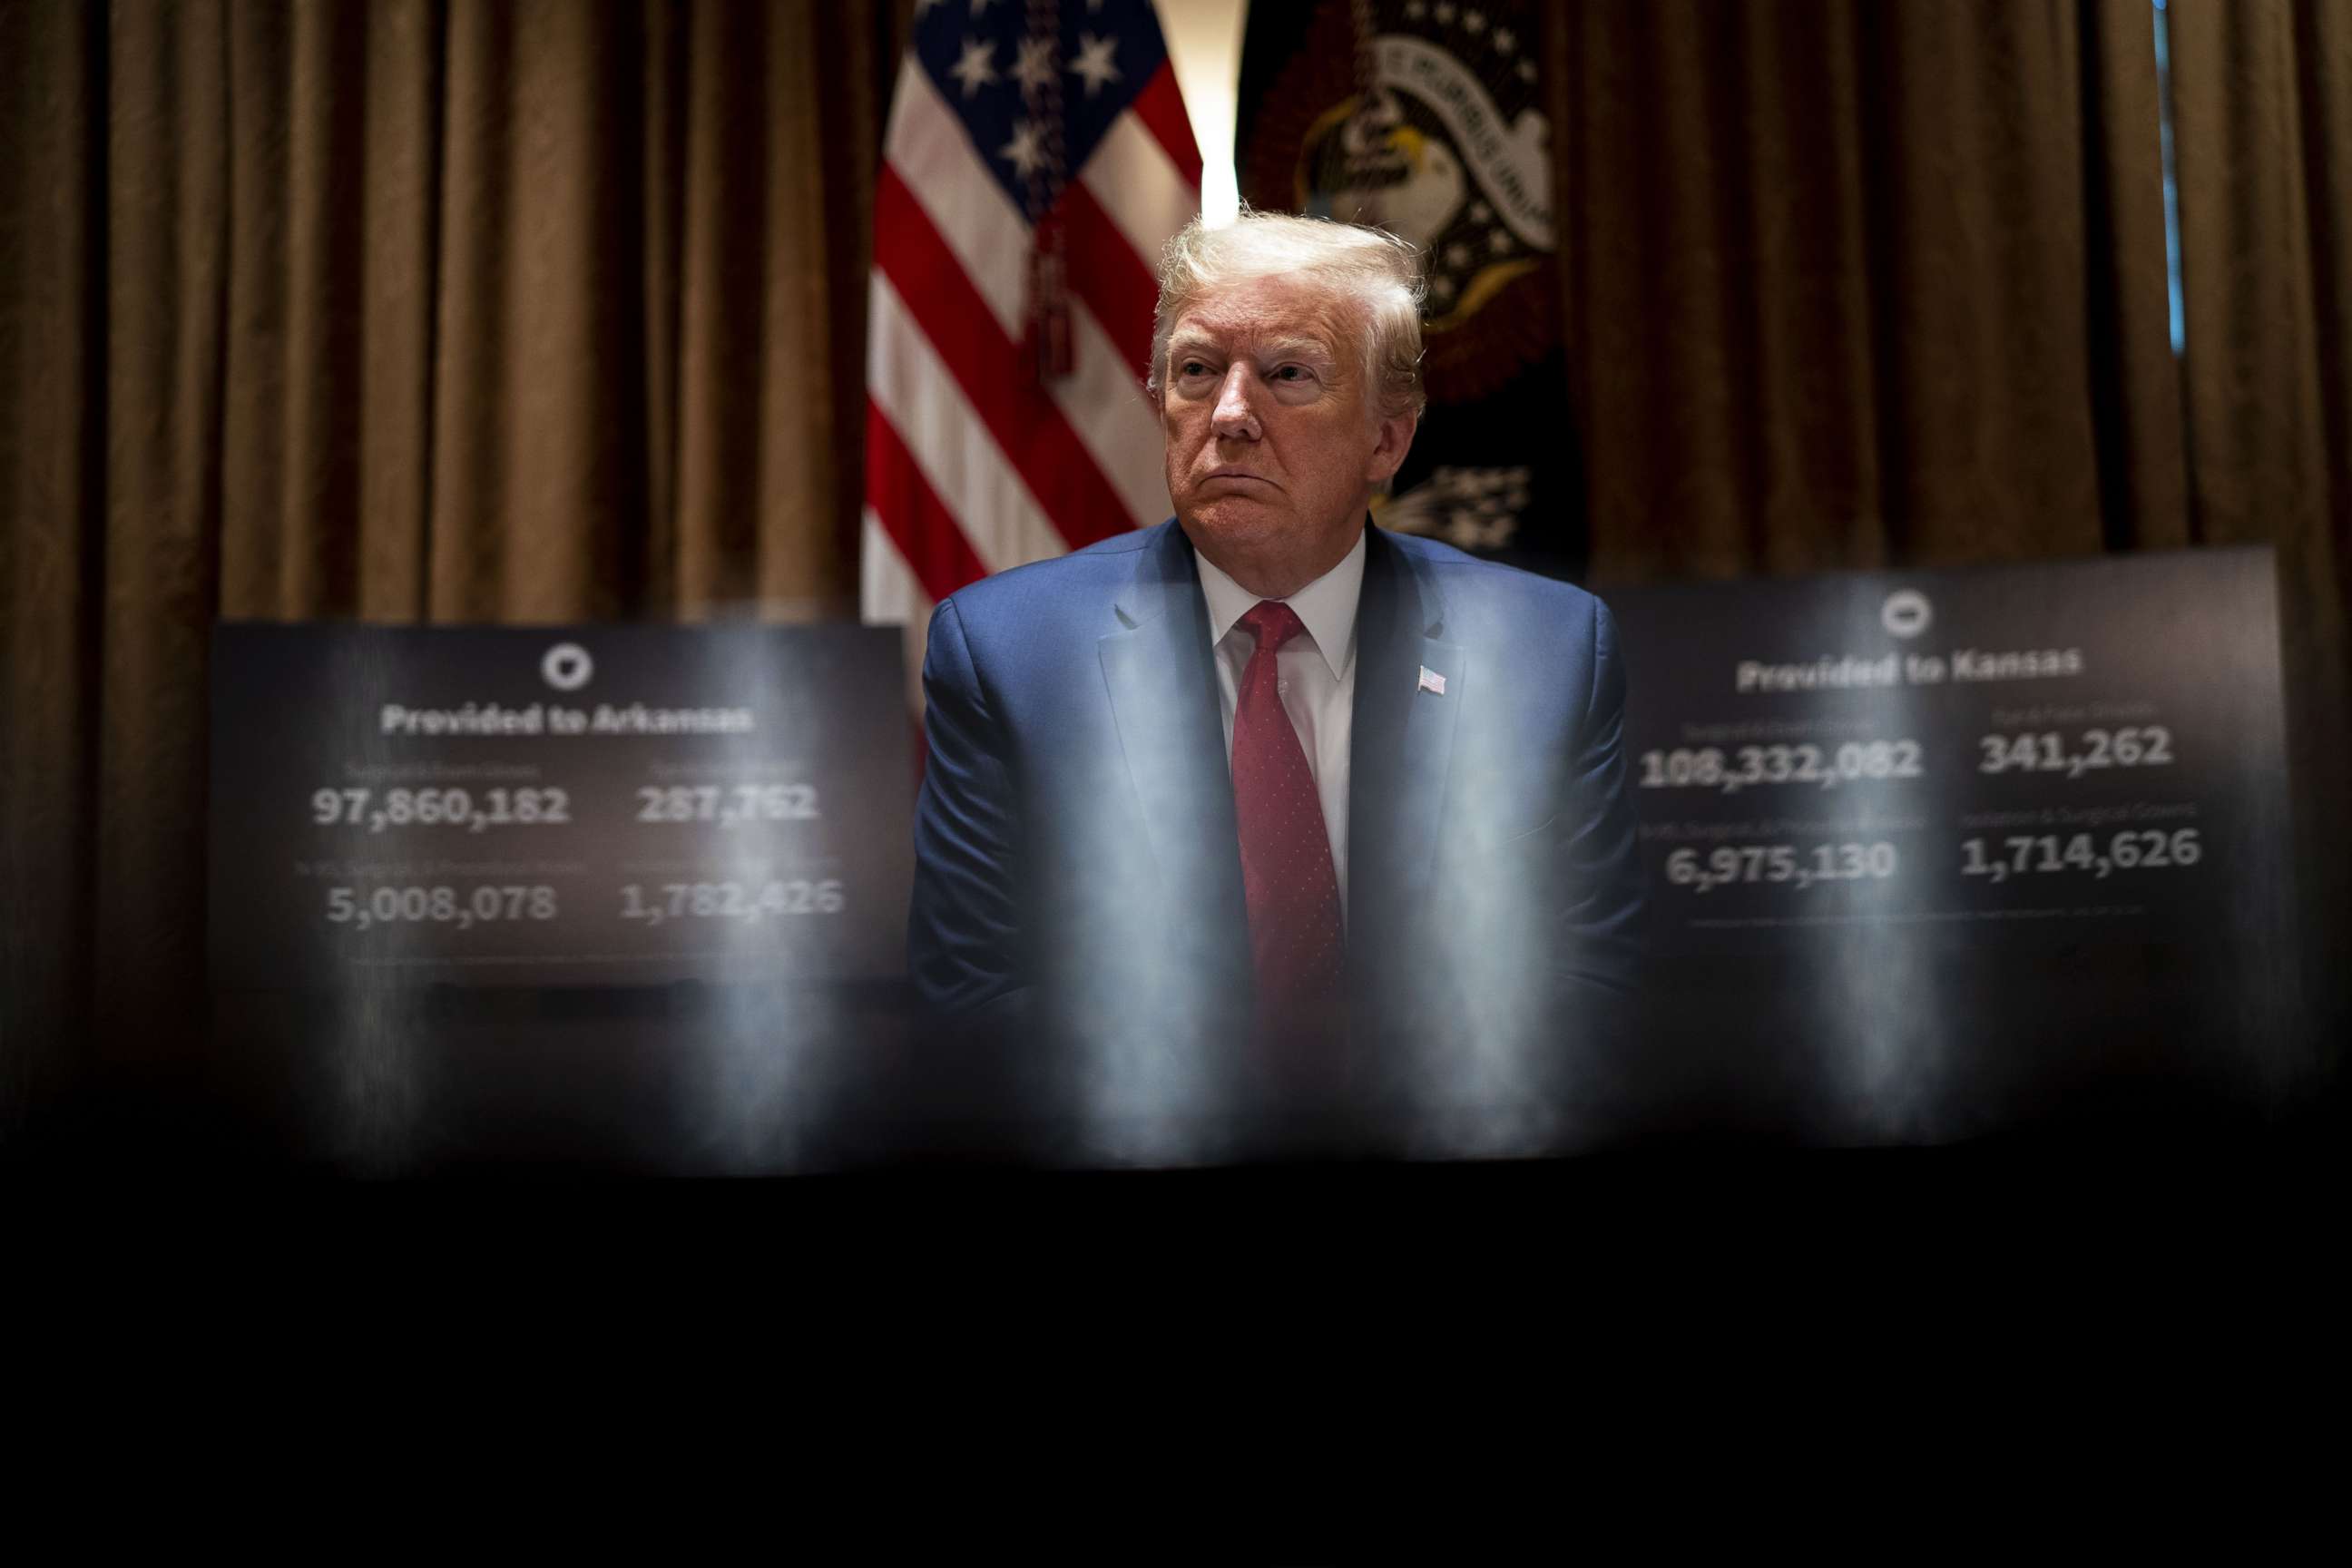 PHOTO: President Donald Trump listens as he attends a meeting with the Arkansas Gov. Asa Hutchinson and Kansas Governor Laura Kelly in the Cabinet Room of the White House May 20, 2020 in Washington.